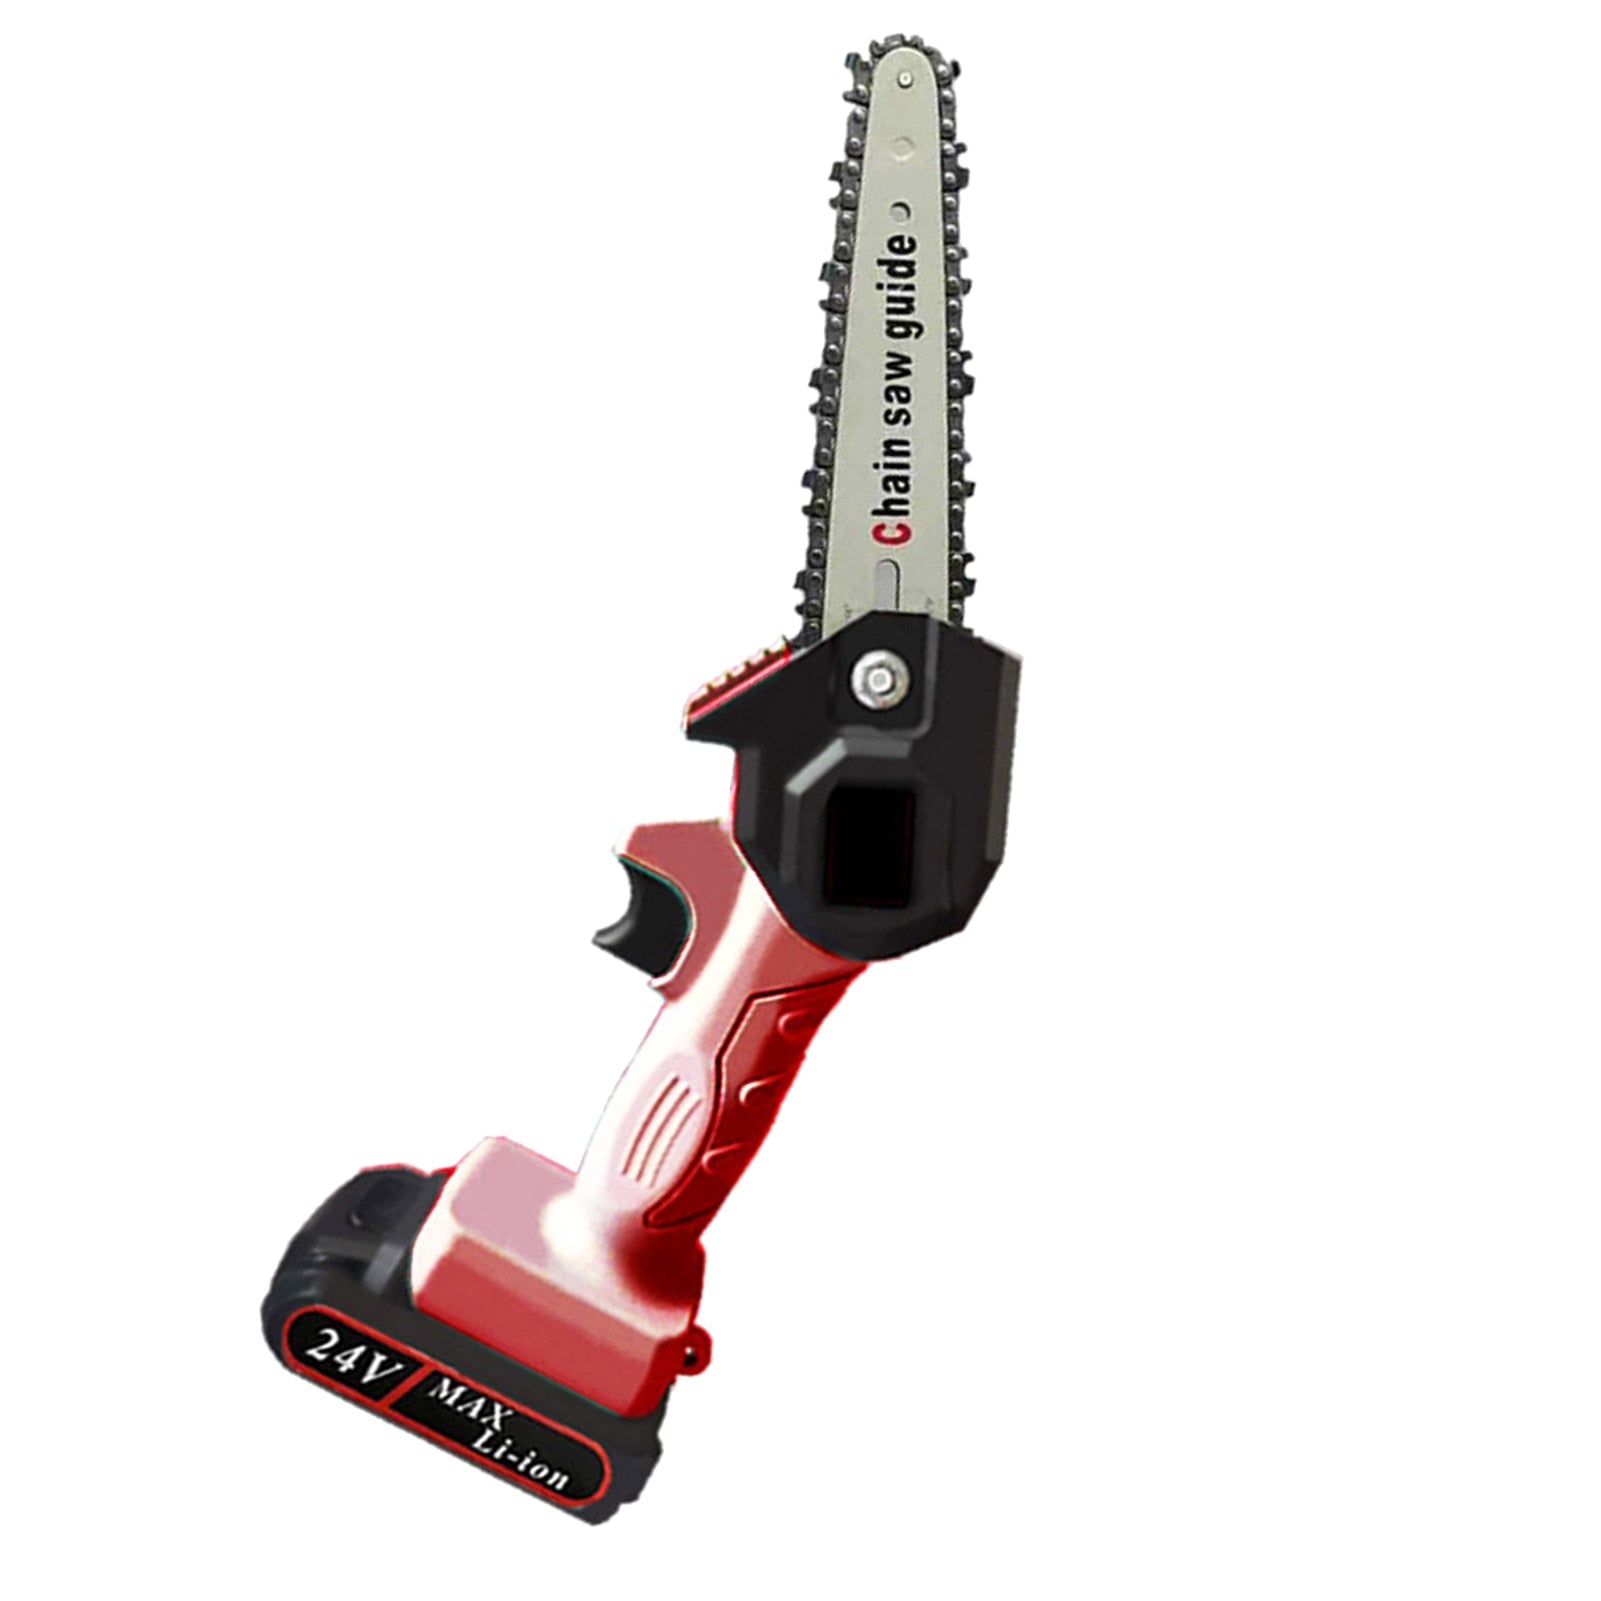 Mini rechargeable saw